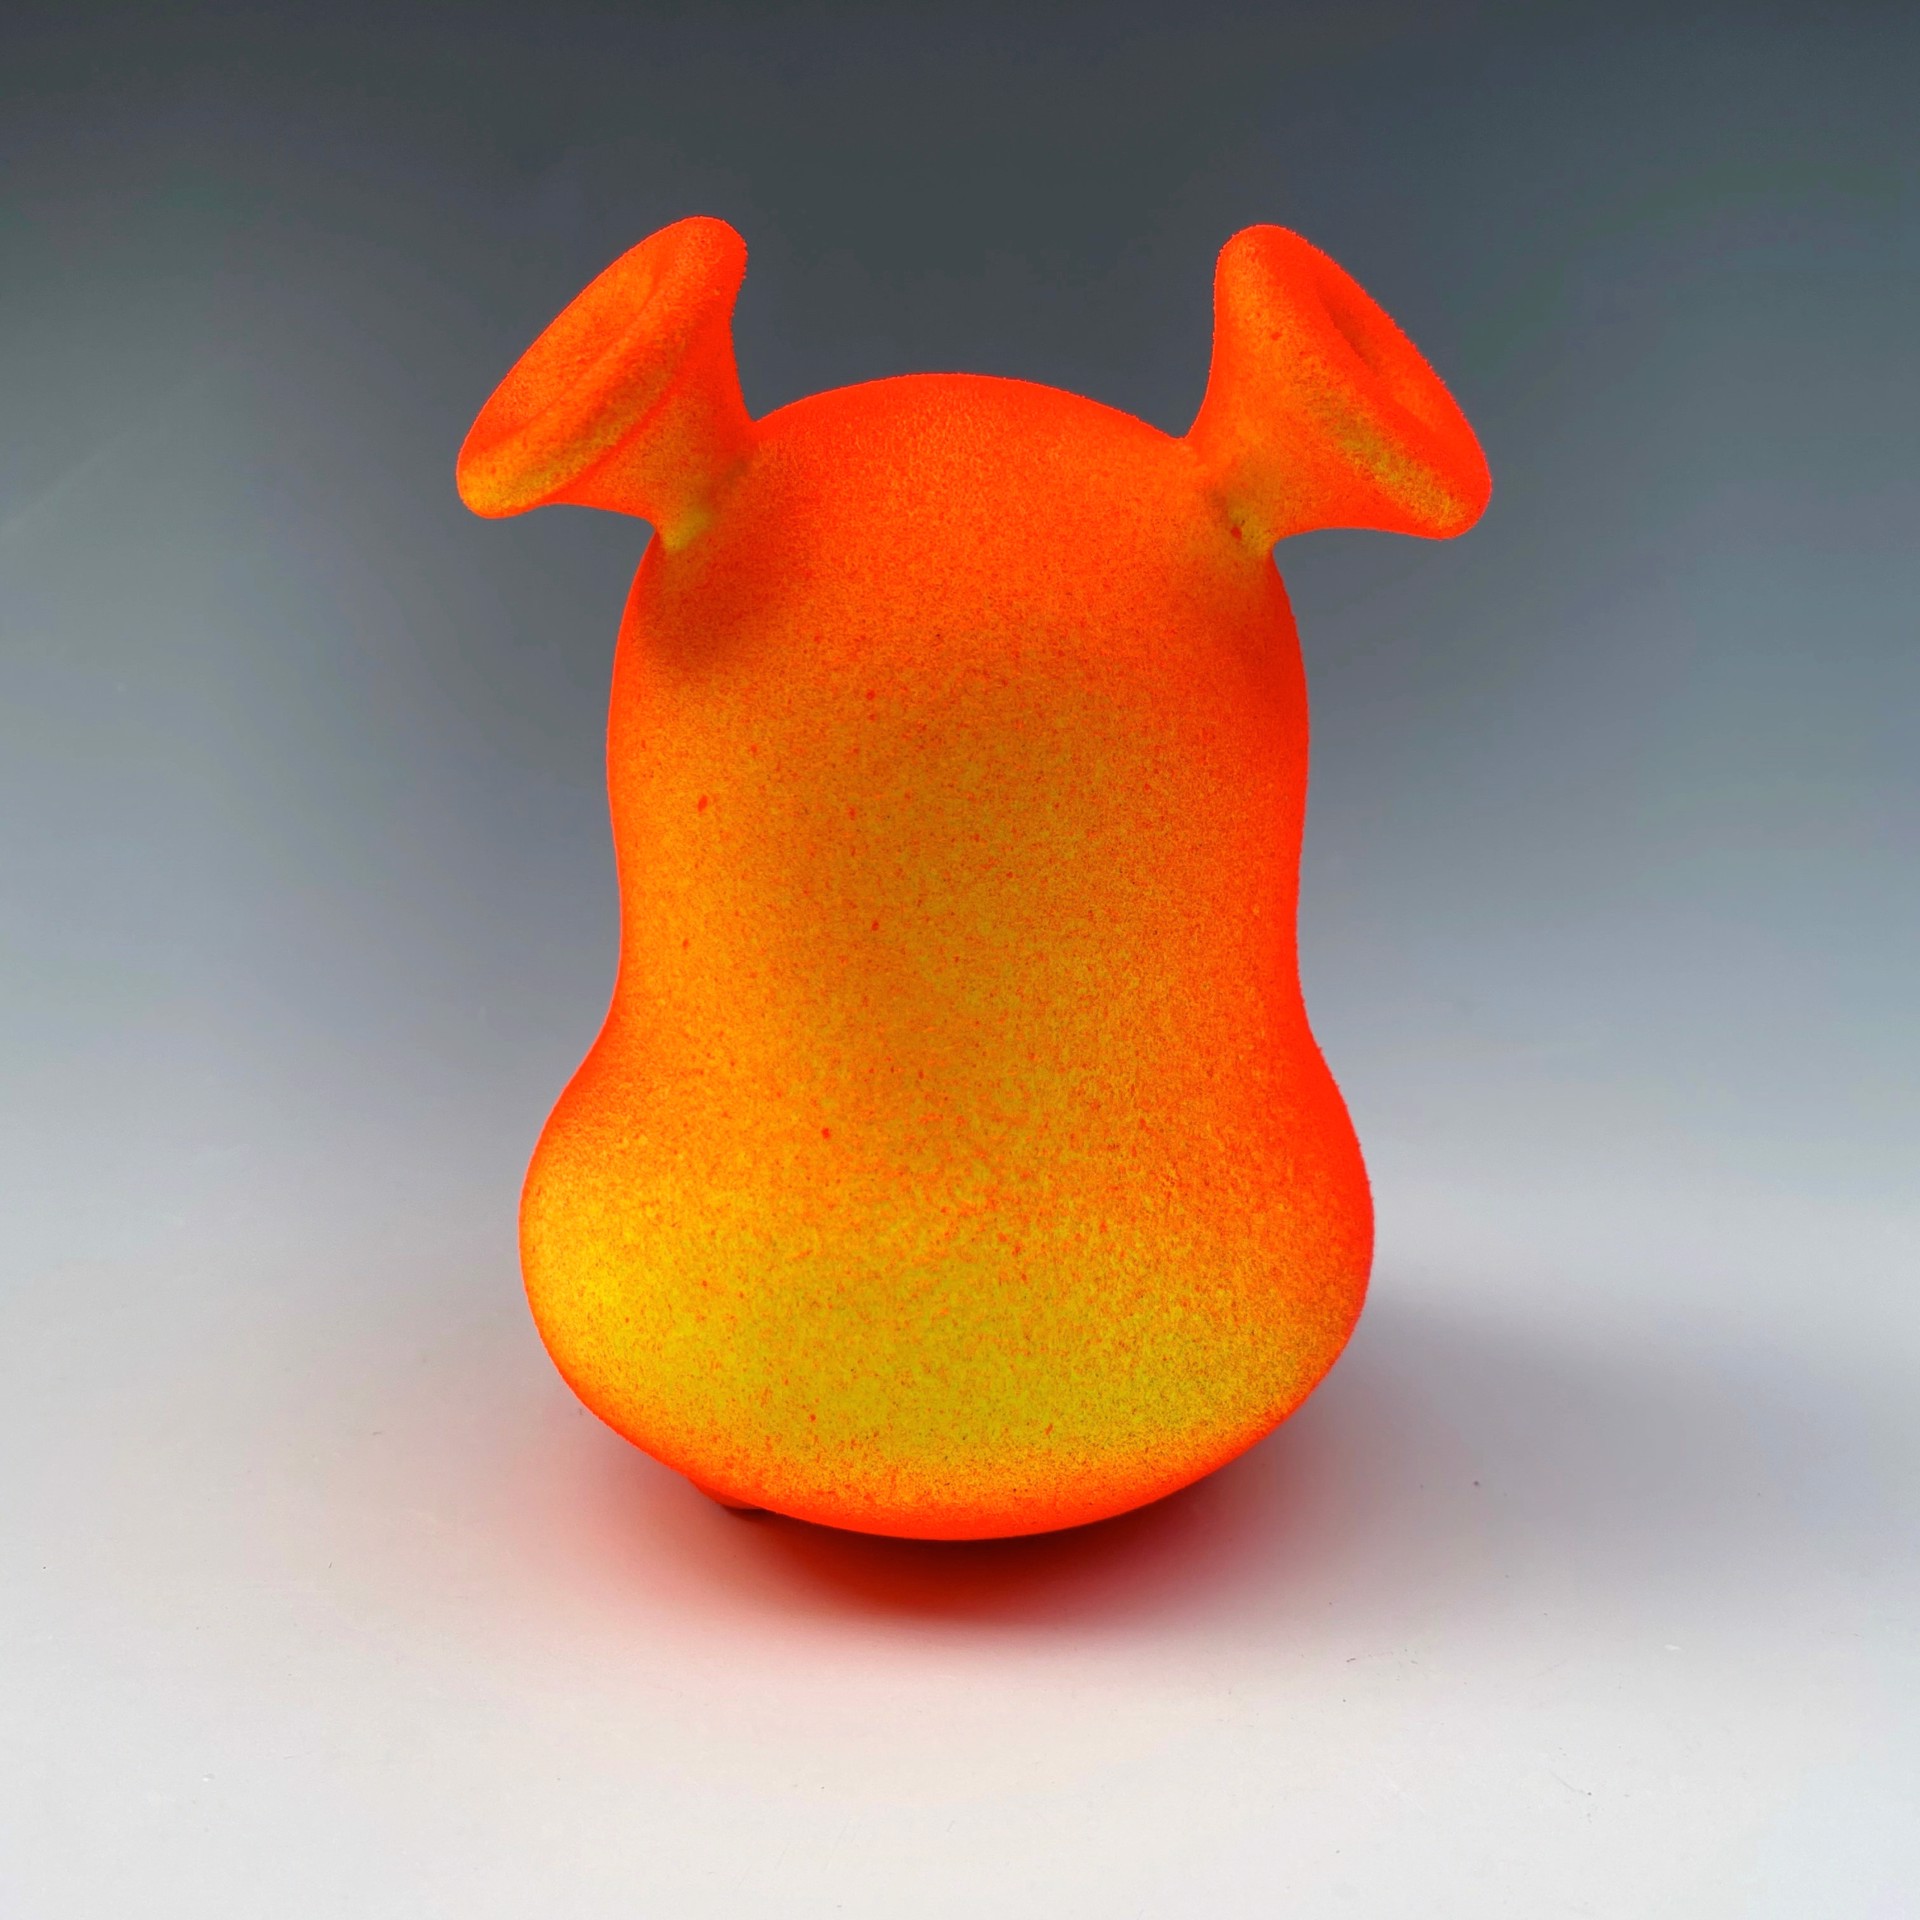 Blooop #1 (Orange and Yellow) by Alina Hayes